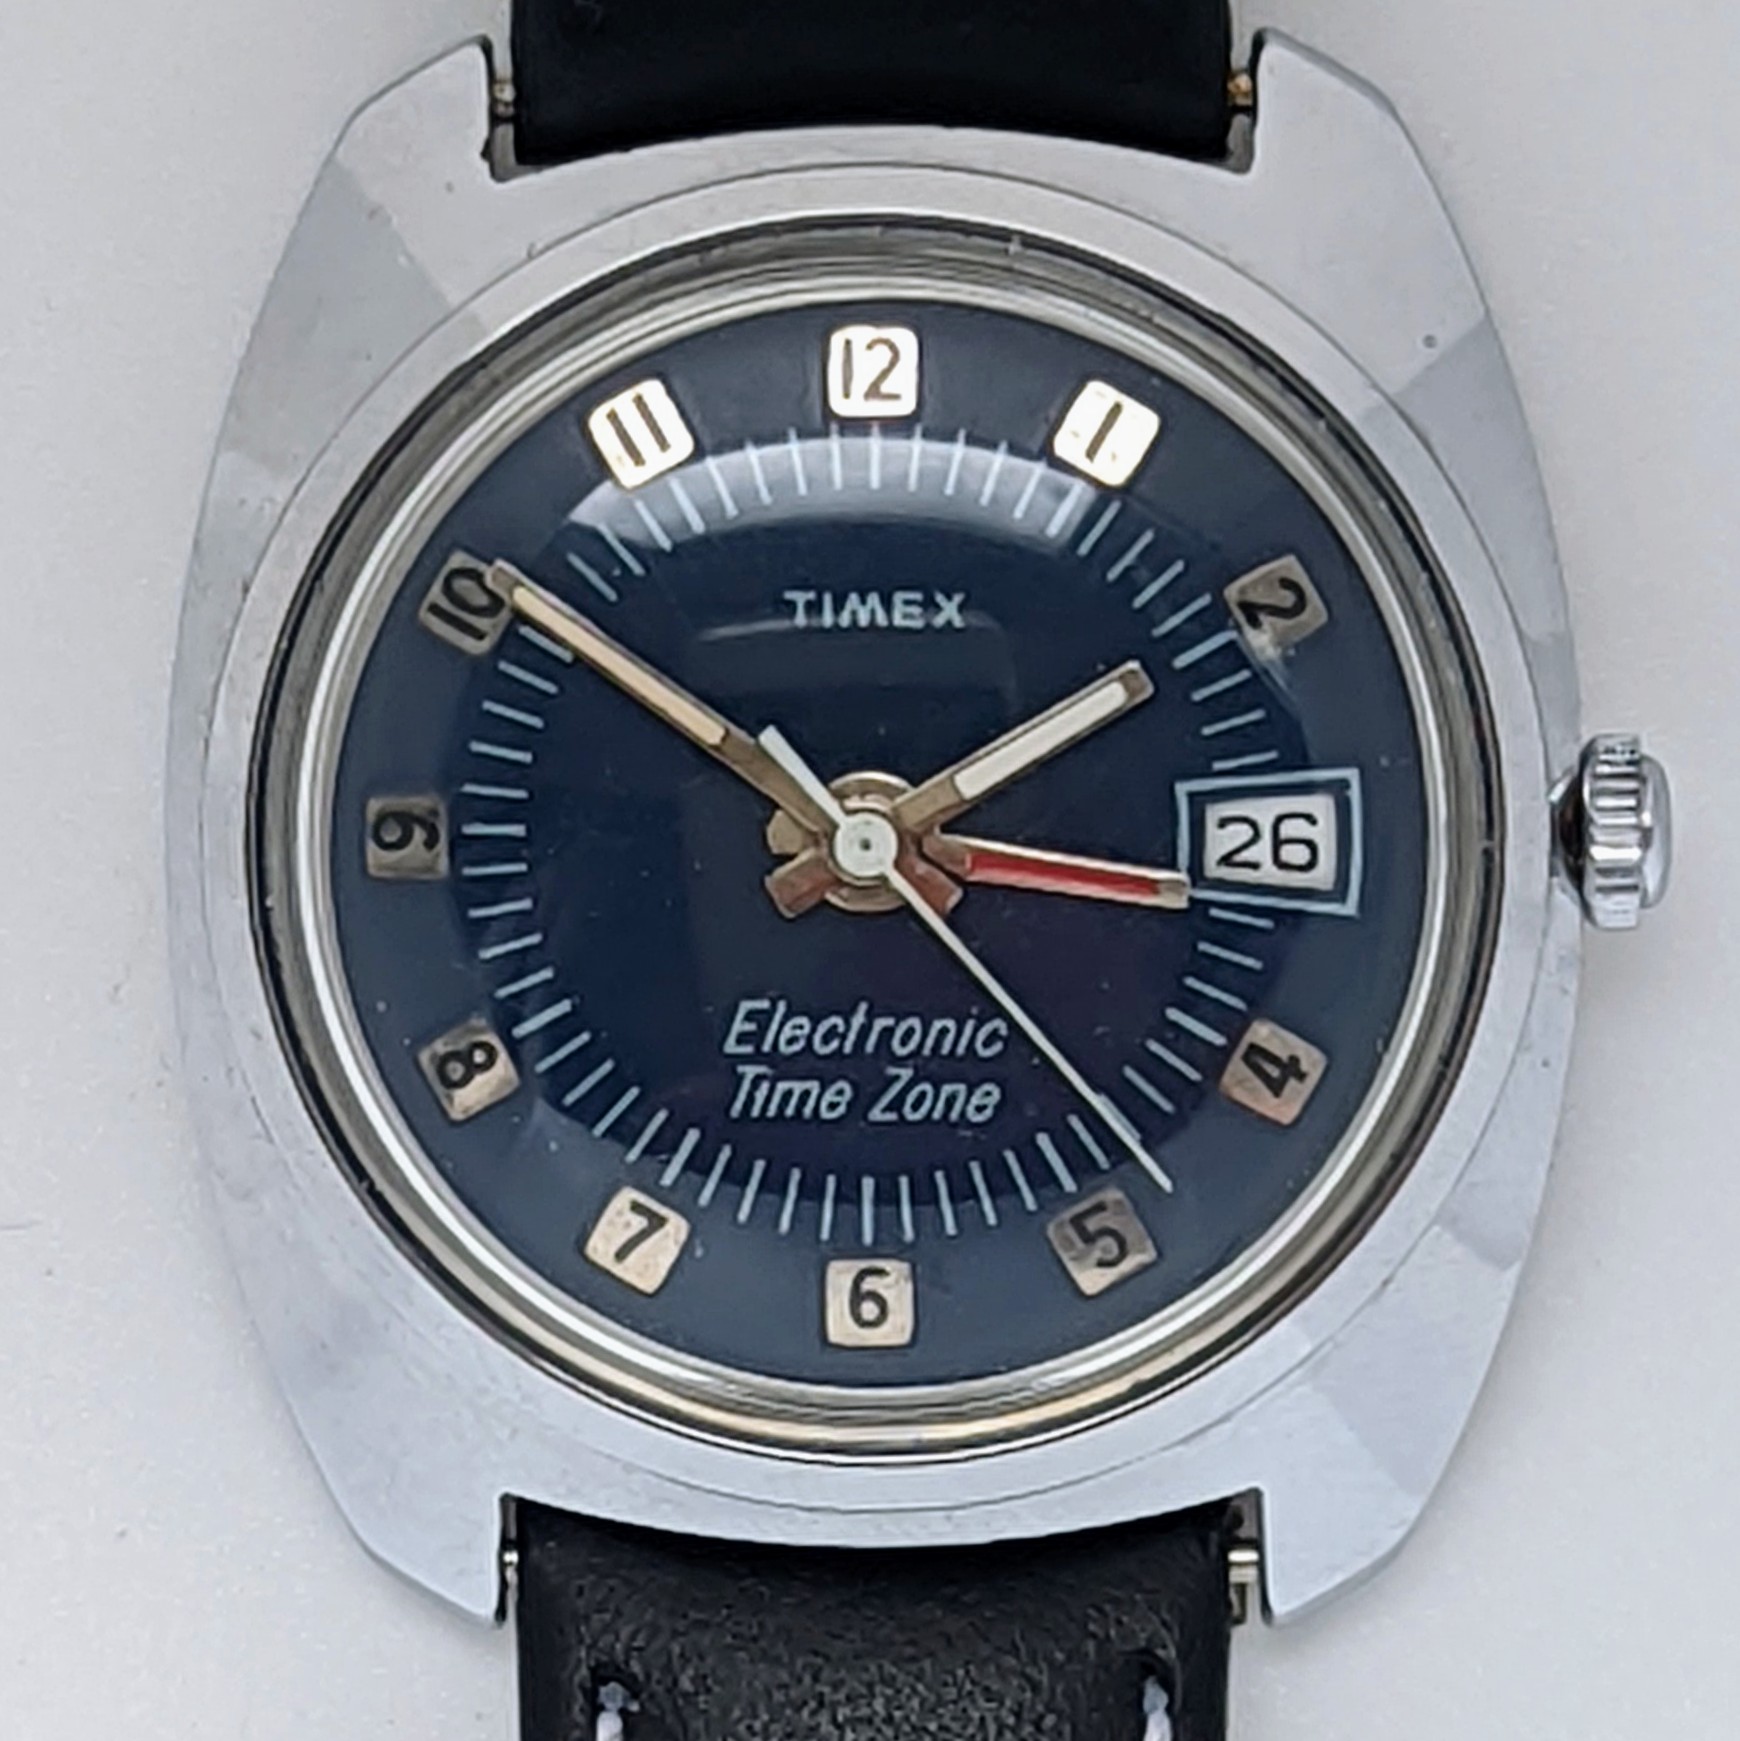 Timex Electronic Time Zone 79750 26574 [1974]